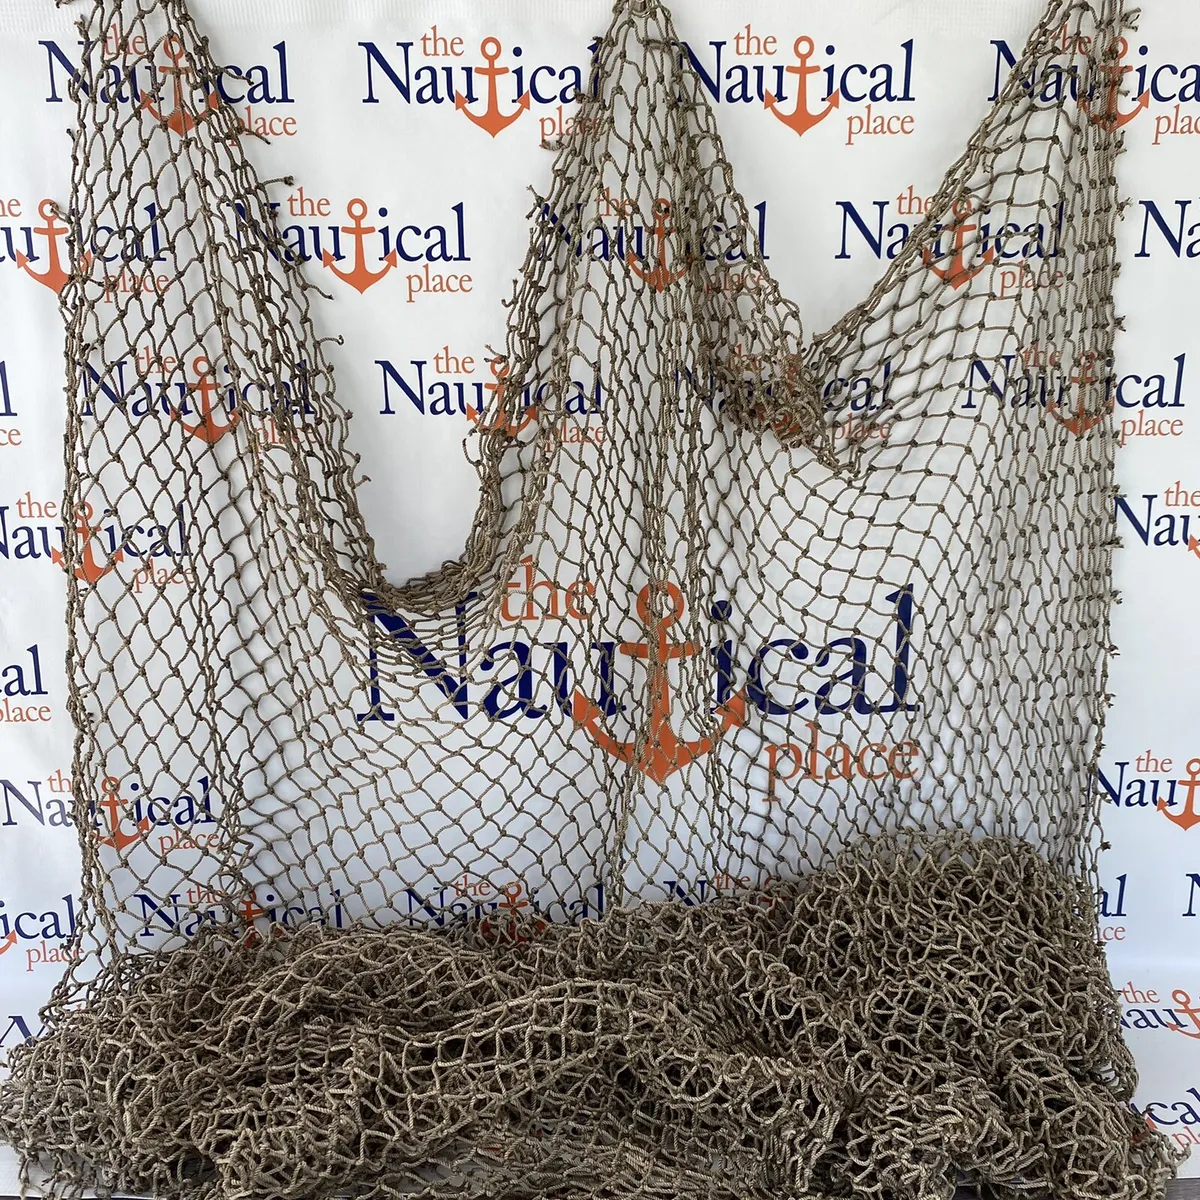 Old Used Fishing Net 2 Ft X 2 Ft Knotted Vintage Fish Netting